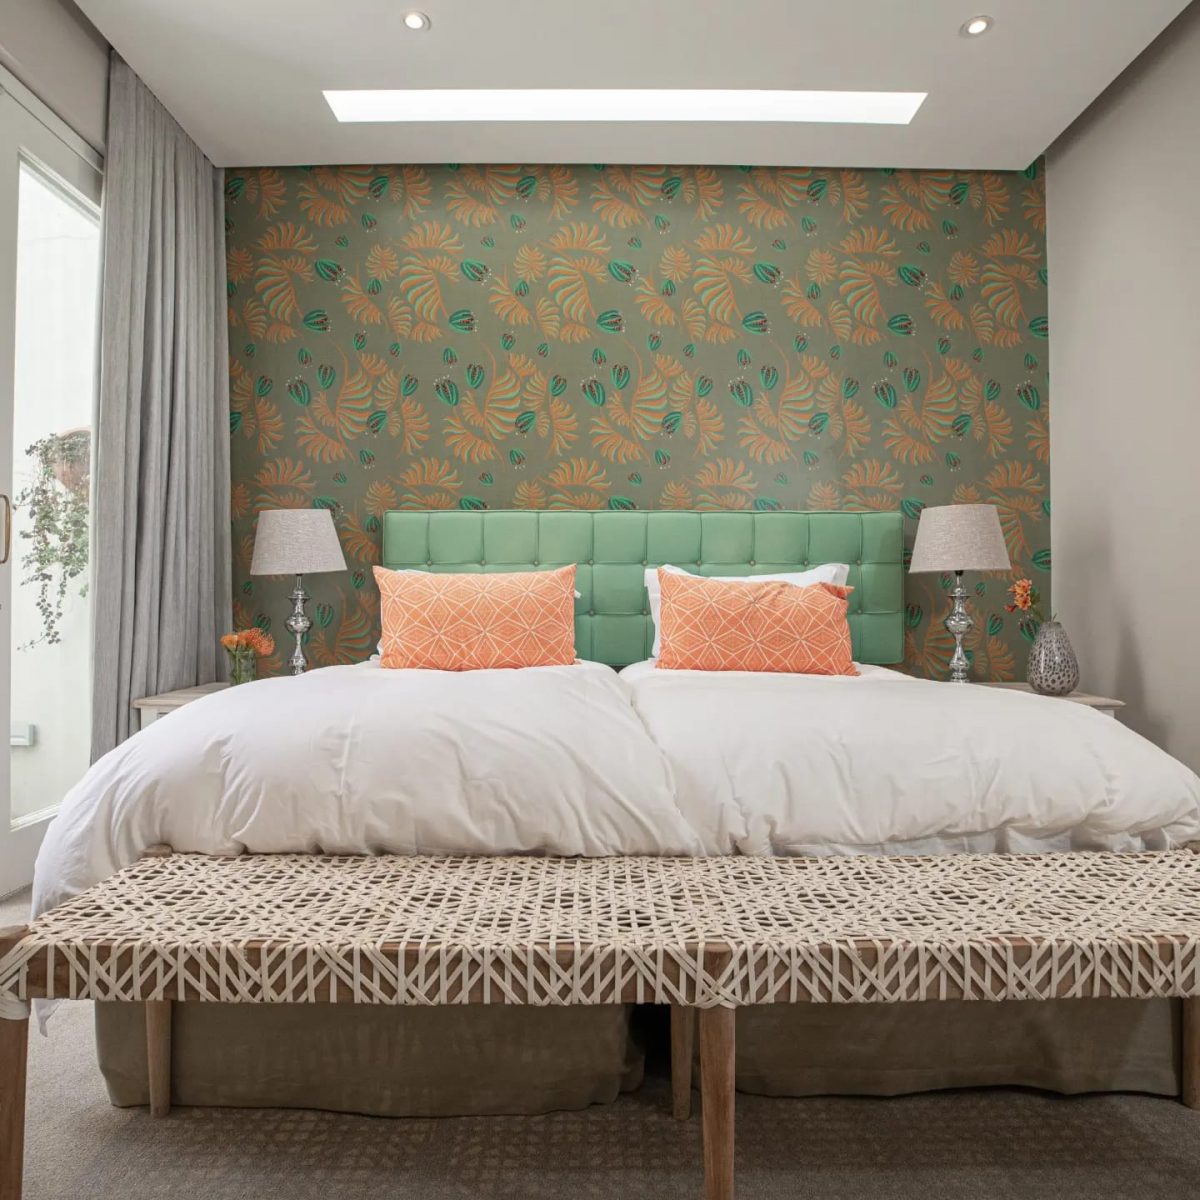 A double bedroom at Thirty On Grace, luxury guesthouse, Cape Town, South Africa